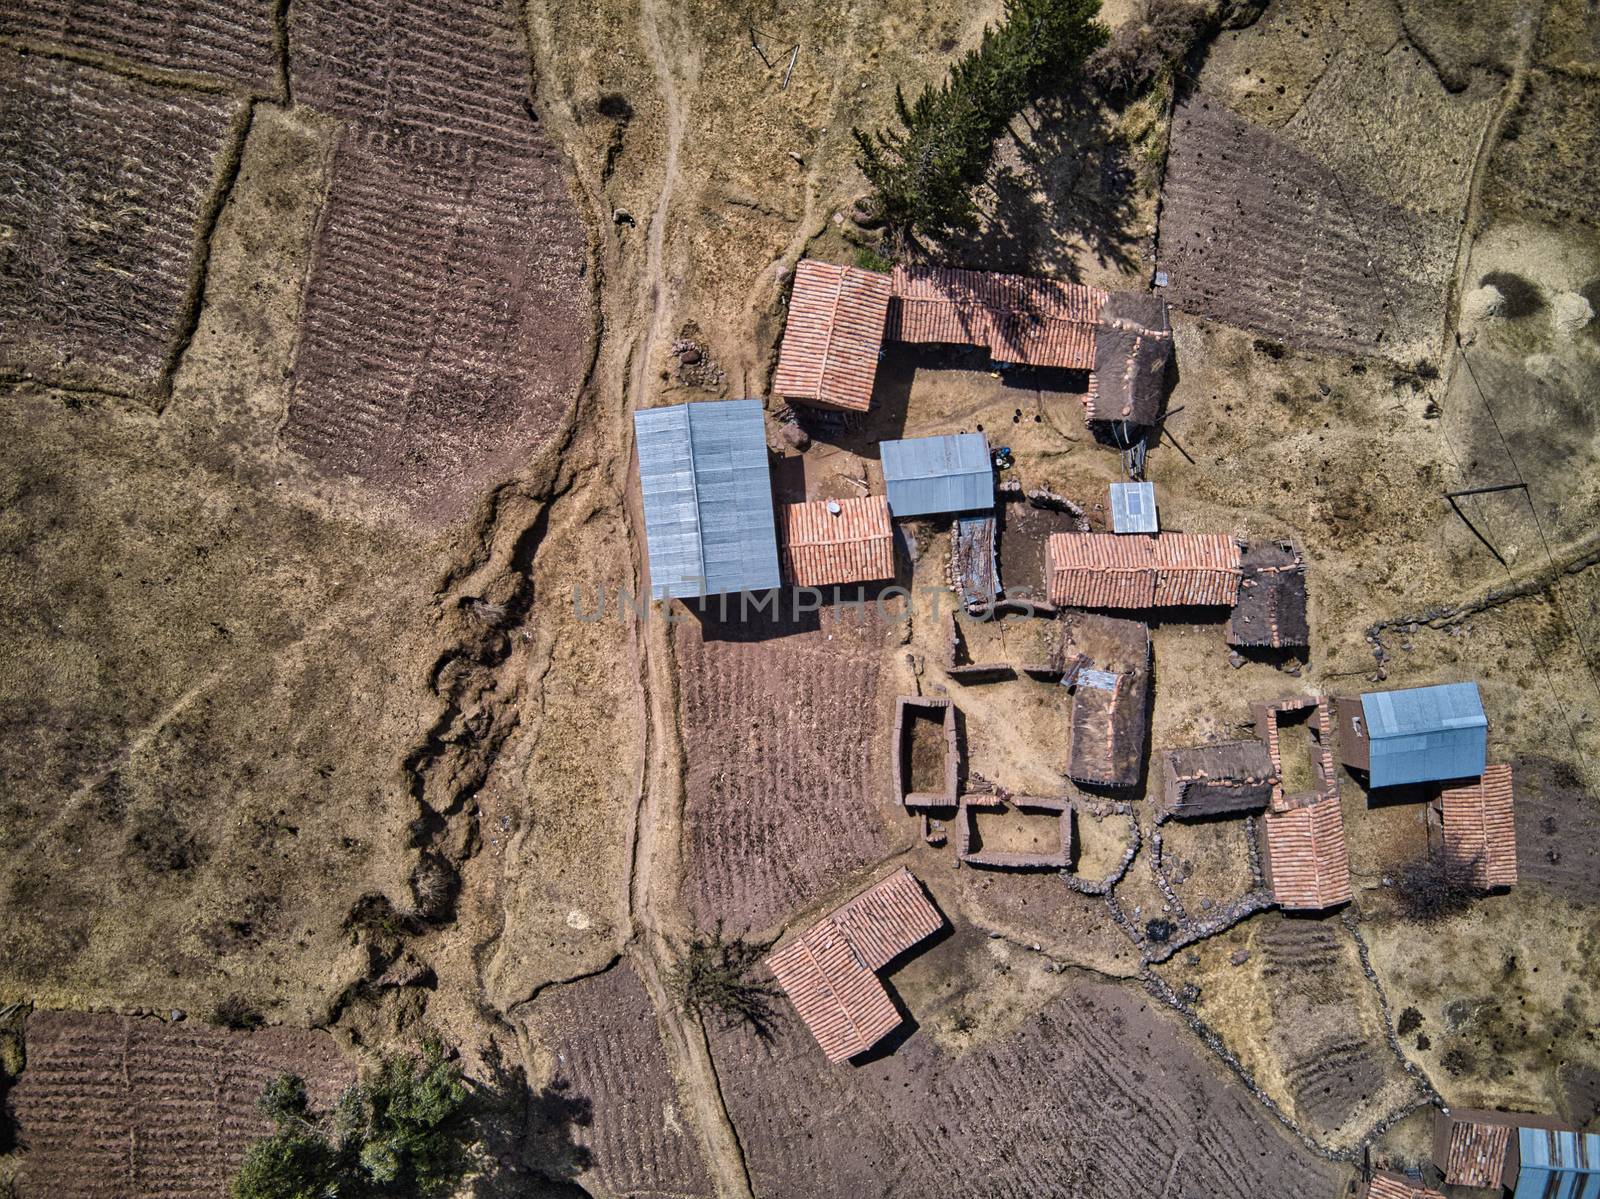 Aerial view of small village located high in Andes, Peru